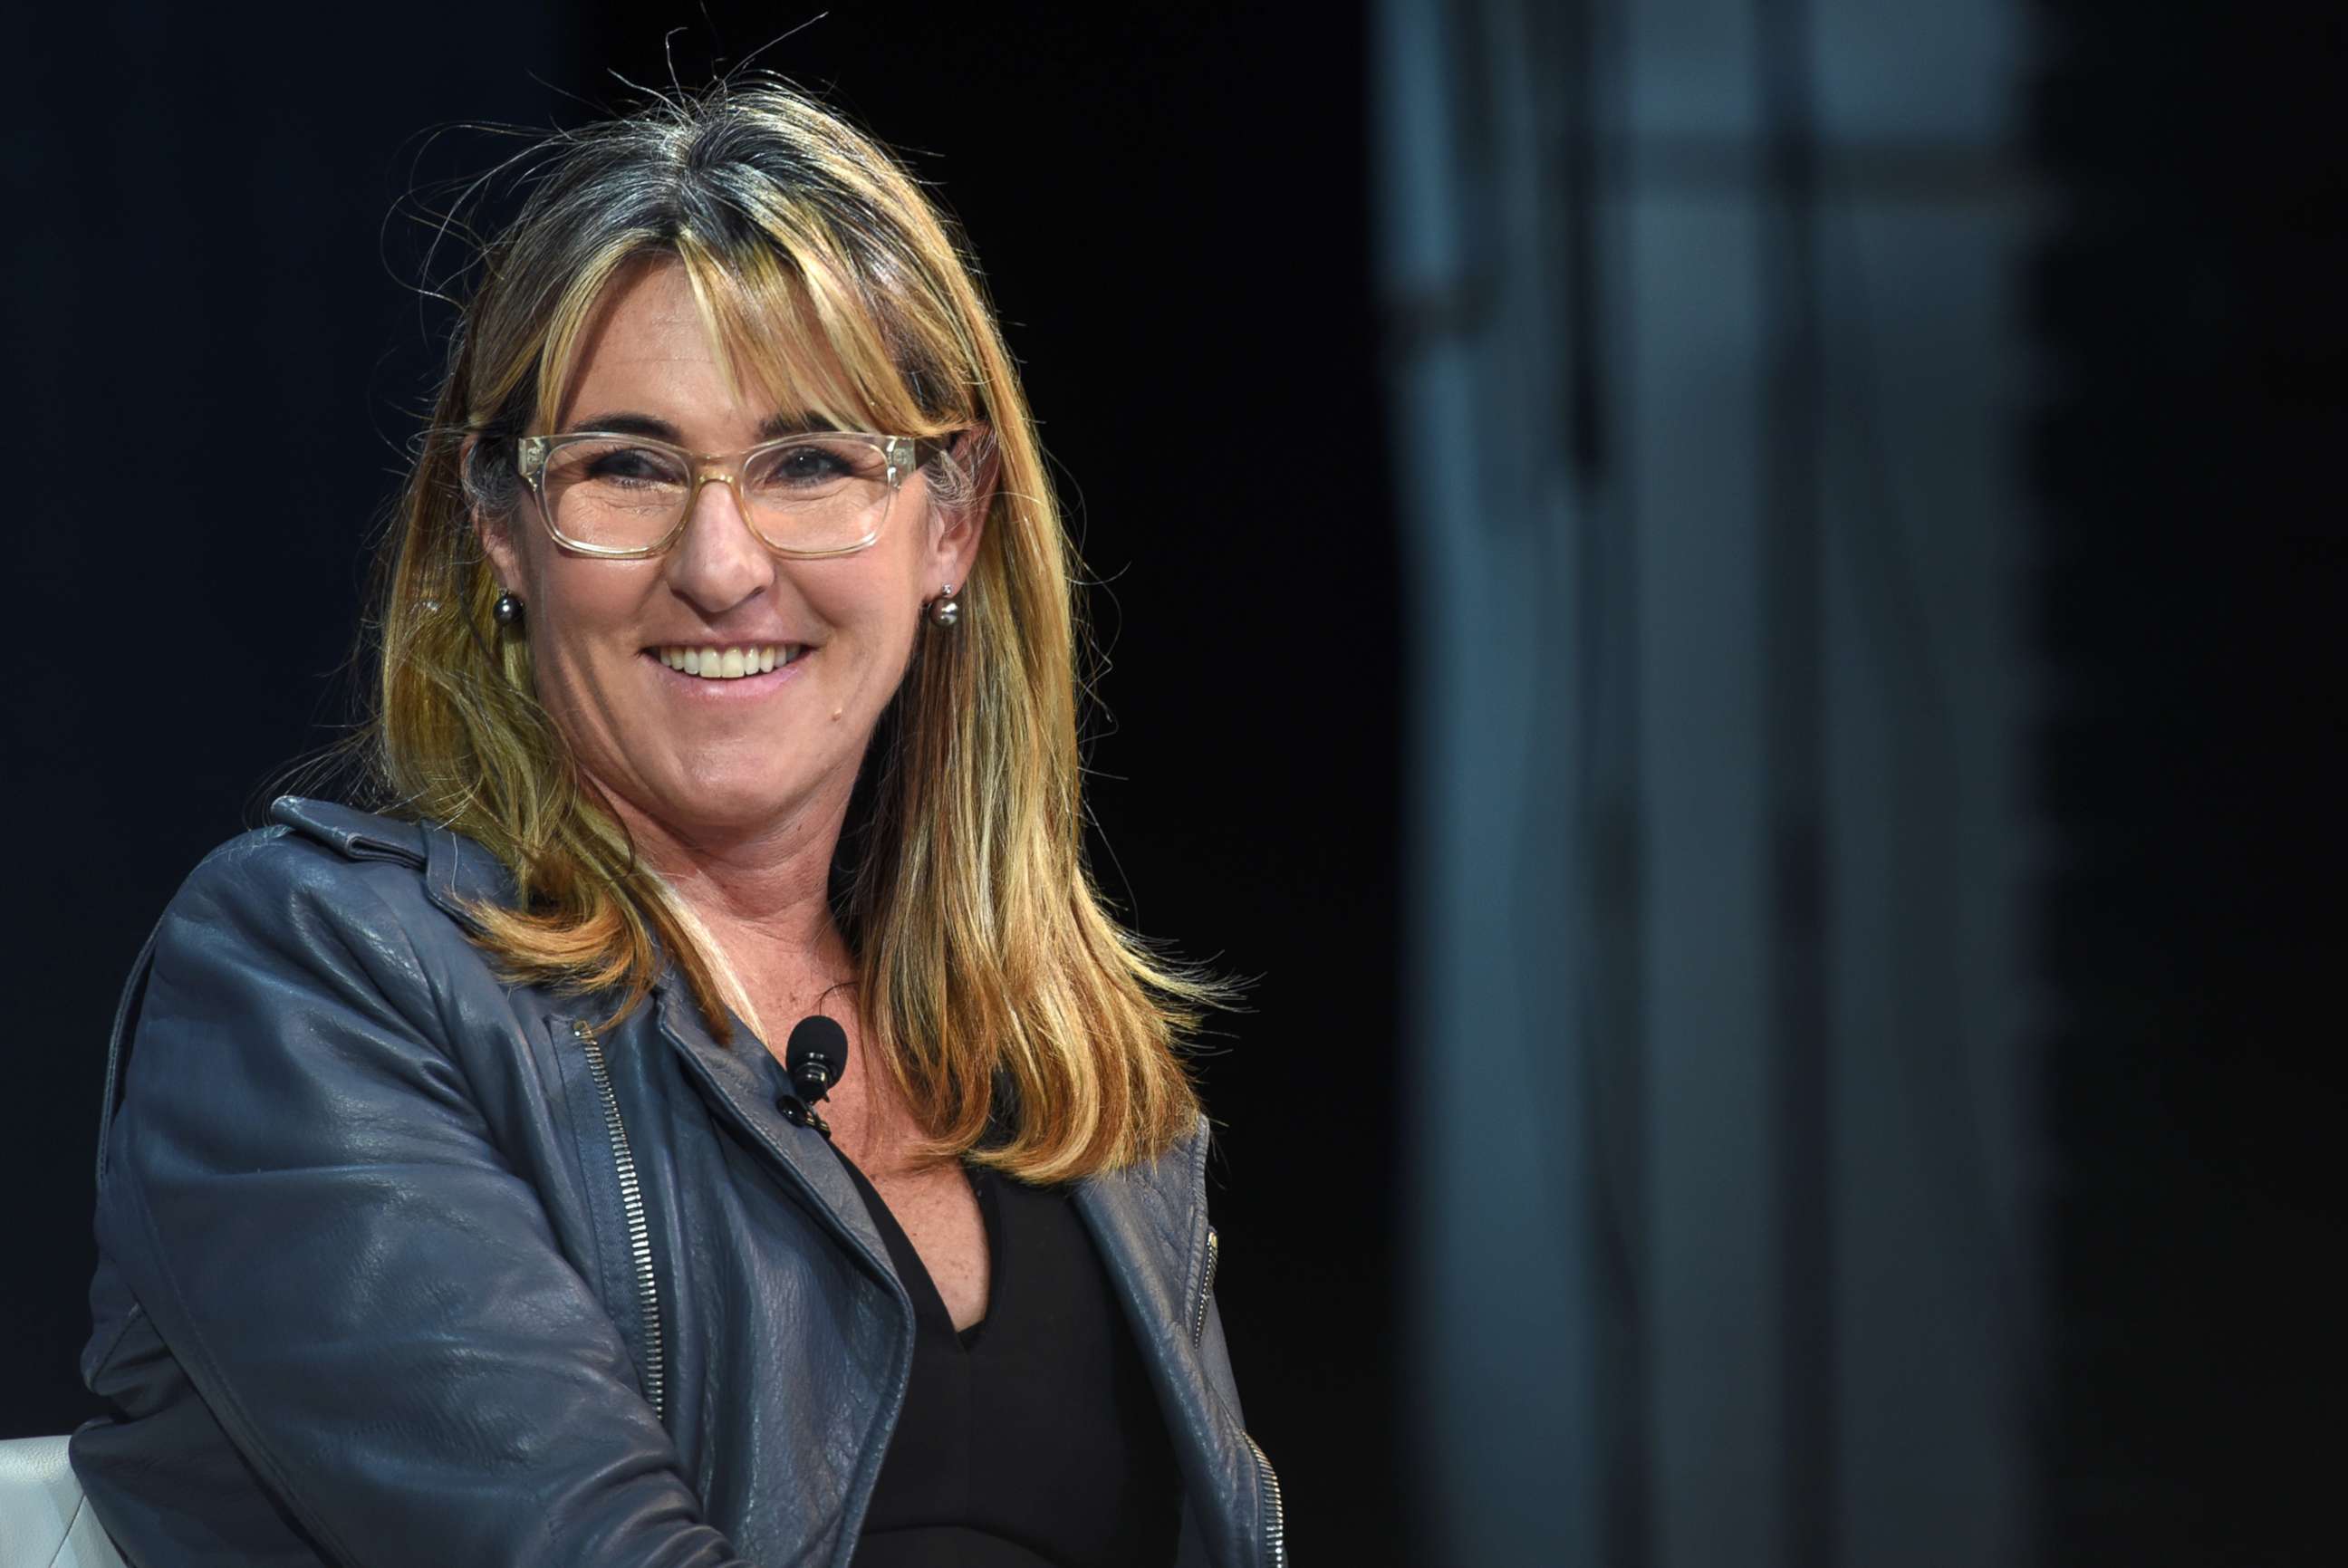 PHOTO: Nancy Dubuc, CEO of Vice Media, speaks at the New York Times DealBook conference, Nov. 1, 2018 in New York City.